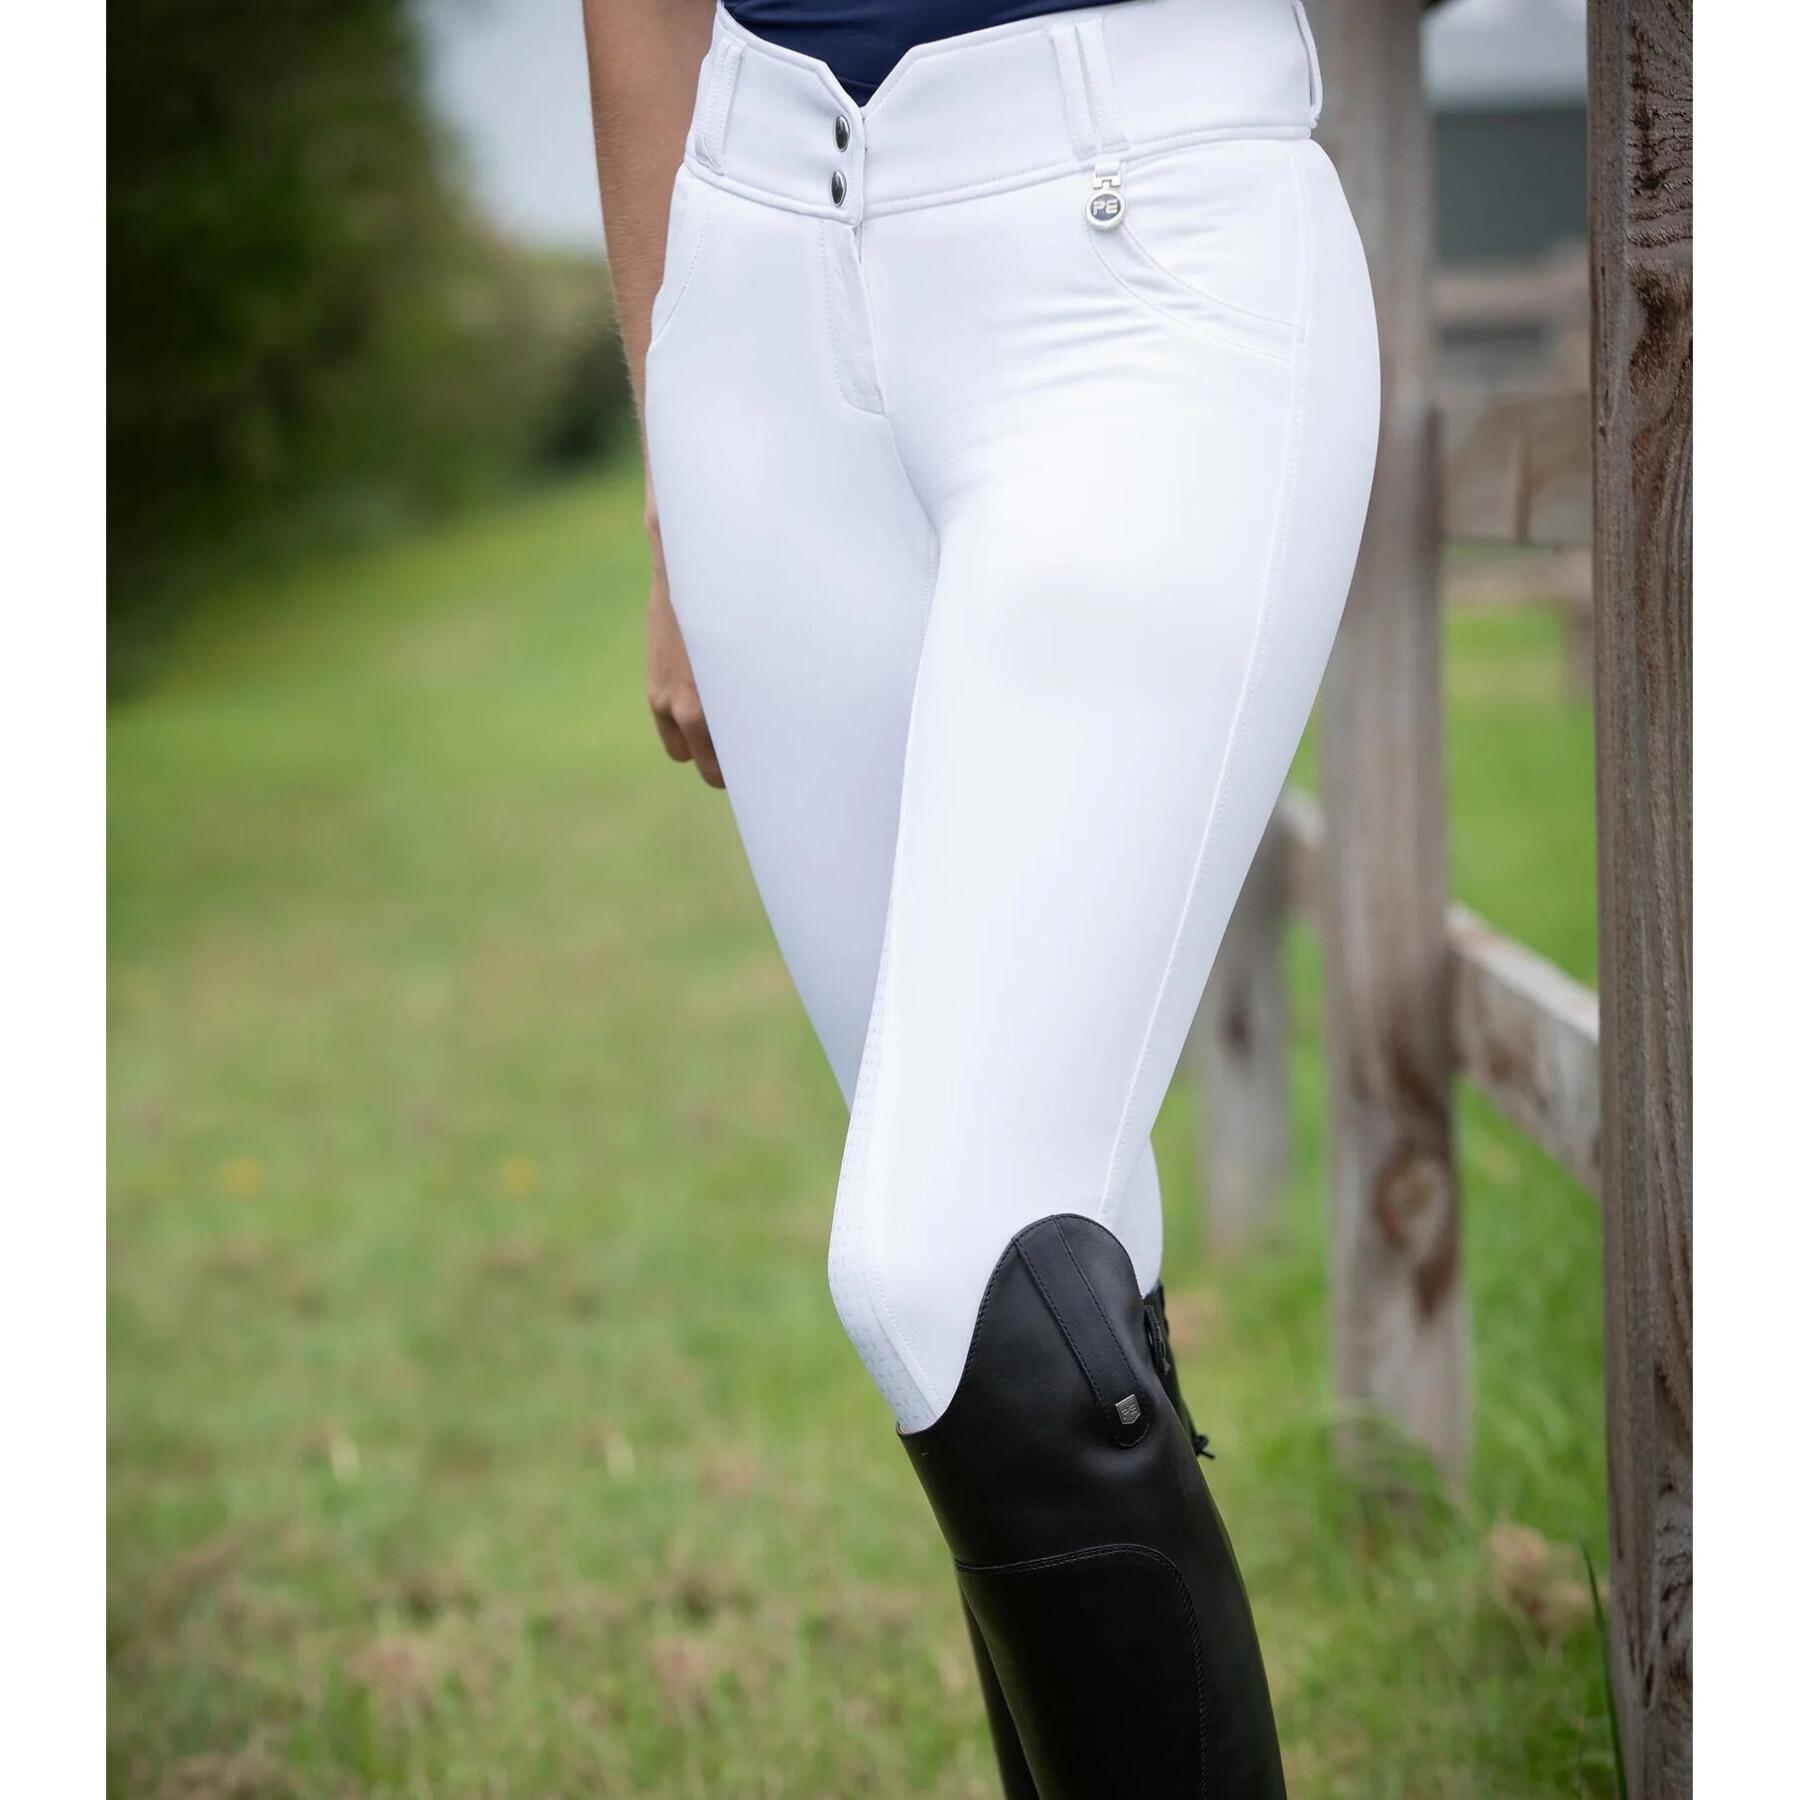 Competition pants with high waist grip woman Premier Equine Sophia